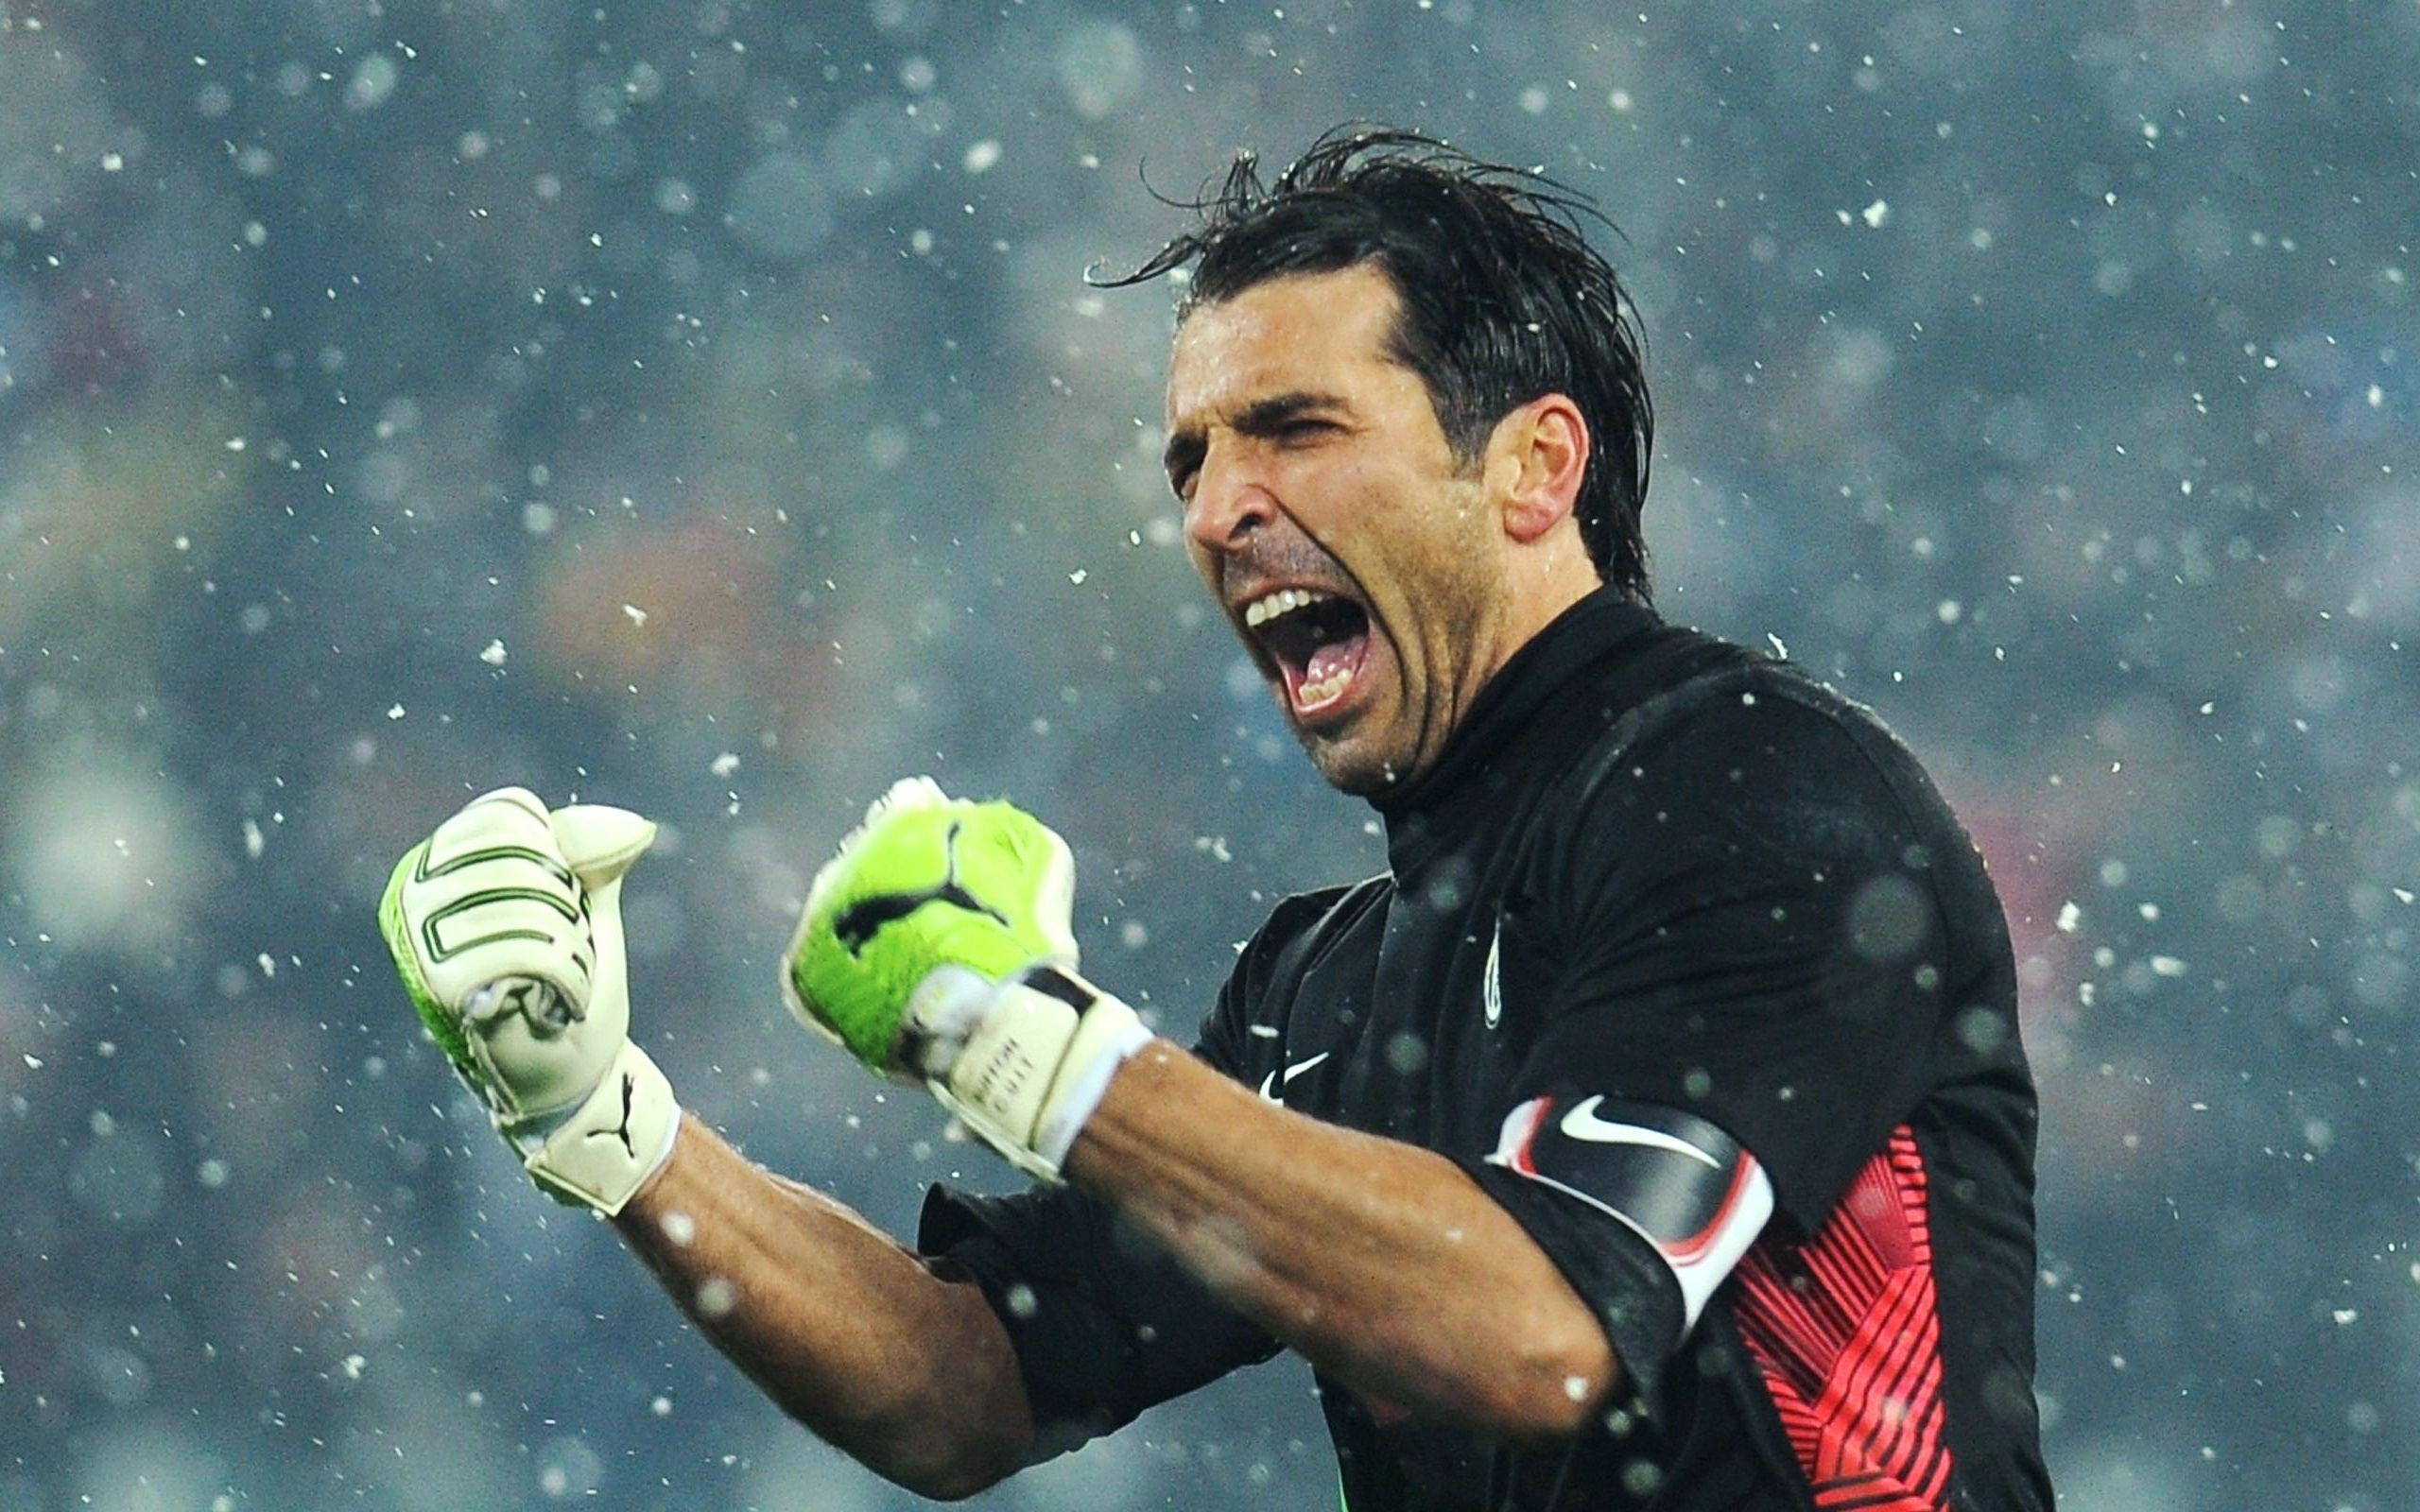 Gianluigi Buffon: The runner-up for the Ballon d'Or in 2006, Three-time part of the FIFPro World11. 2560x1600 HD Wallpaper.